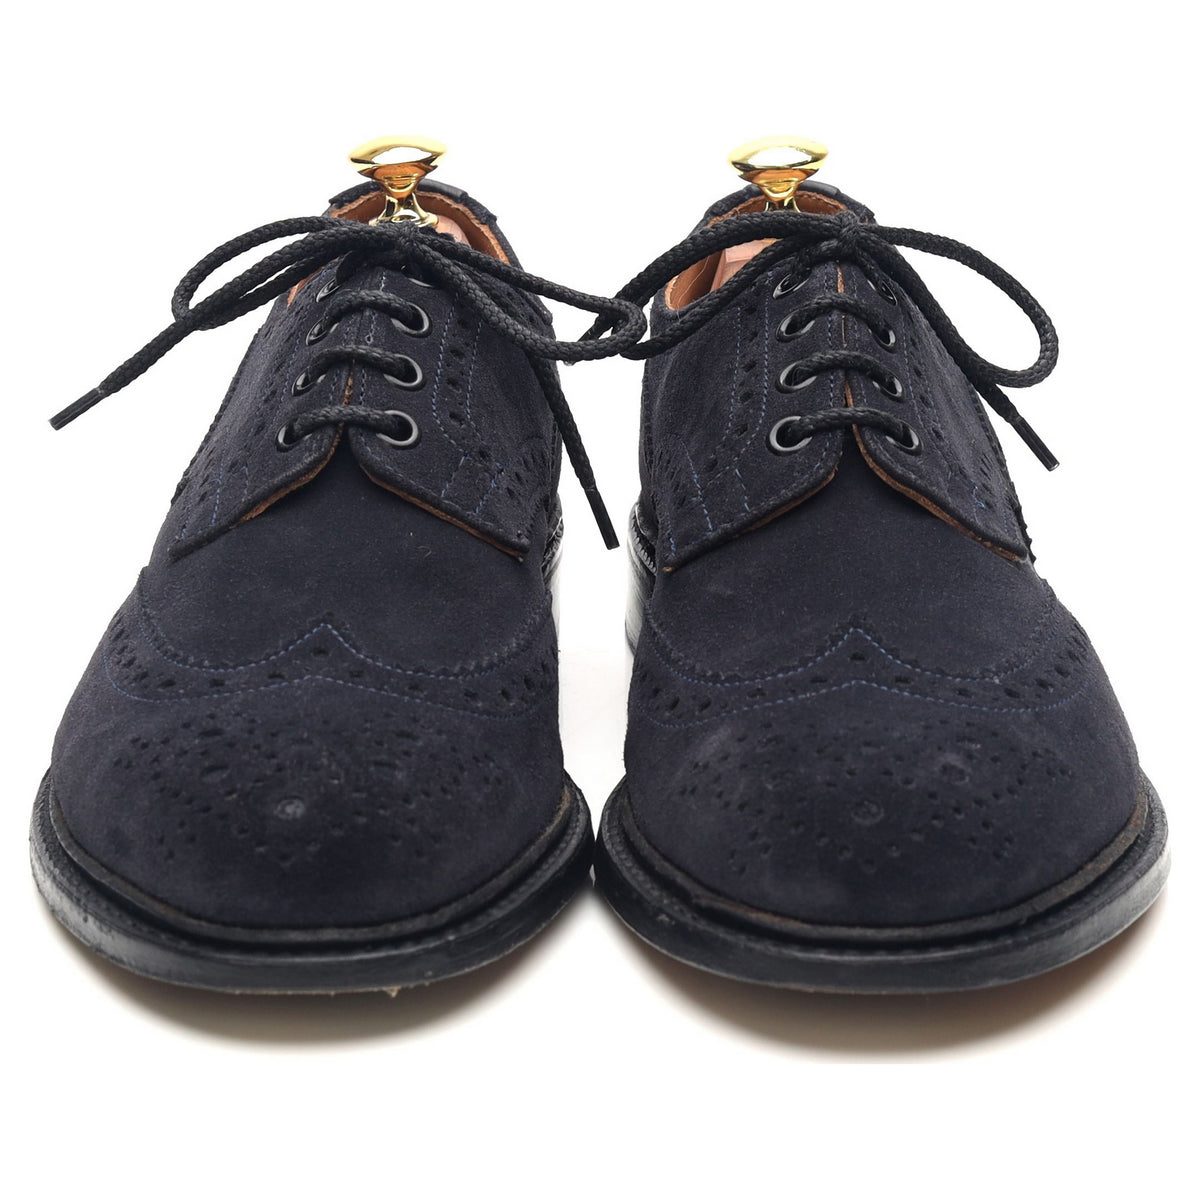 &#39;Bourton&#39; Navy Blue Suede Country Derby Brogues UK 8.5